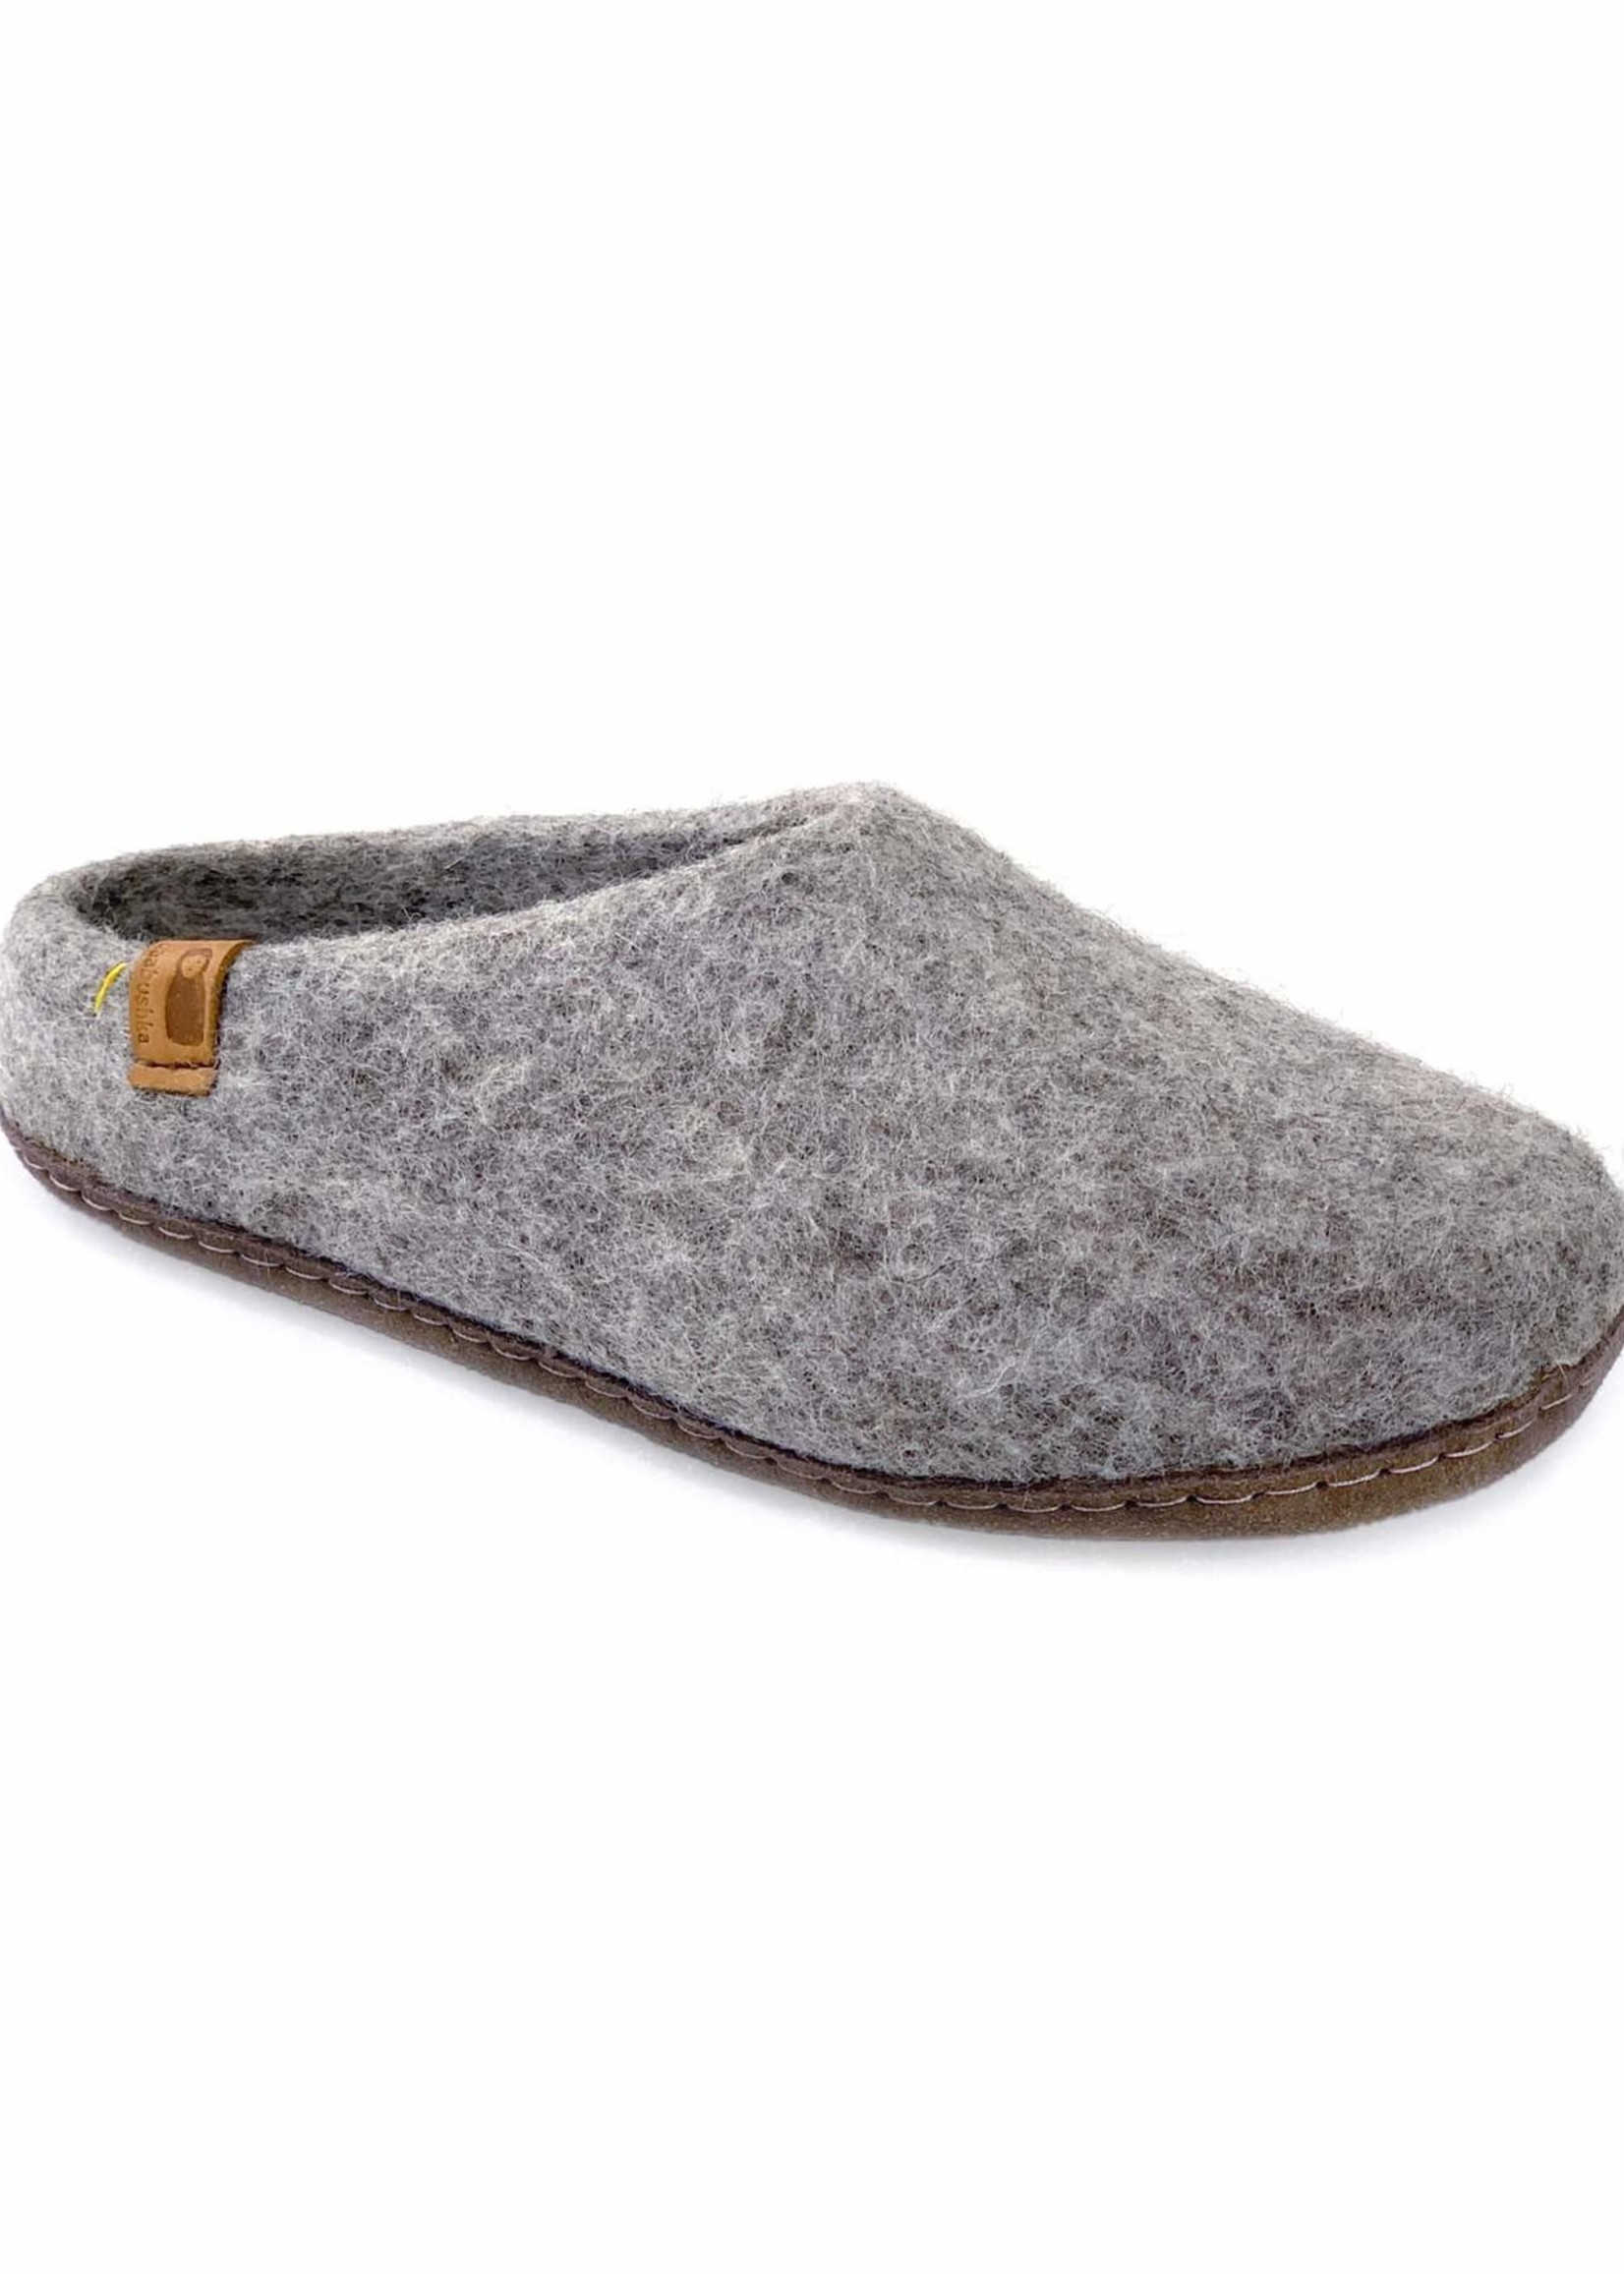 Light Grey Wool Slippers from HumanKind Trade Trade